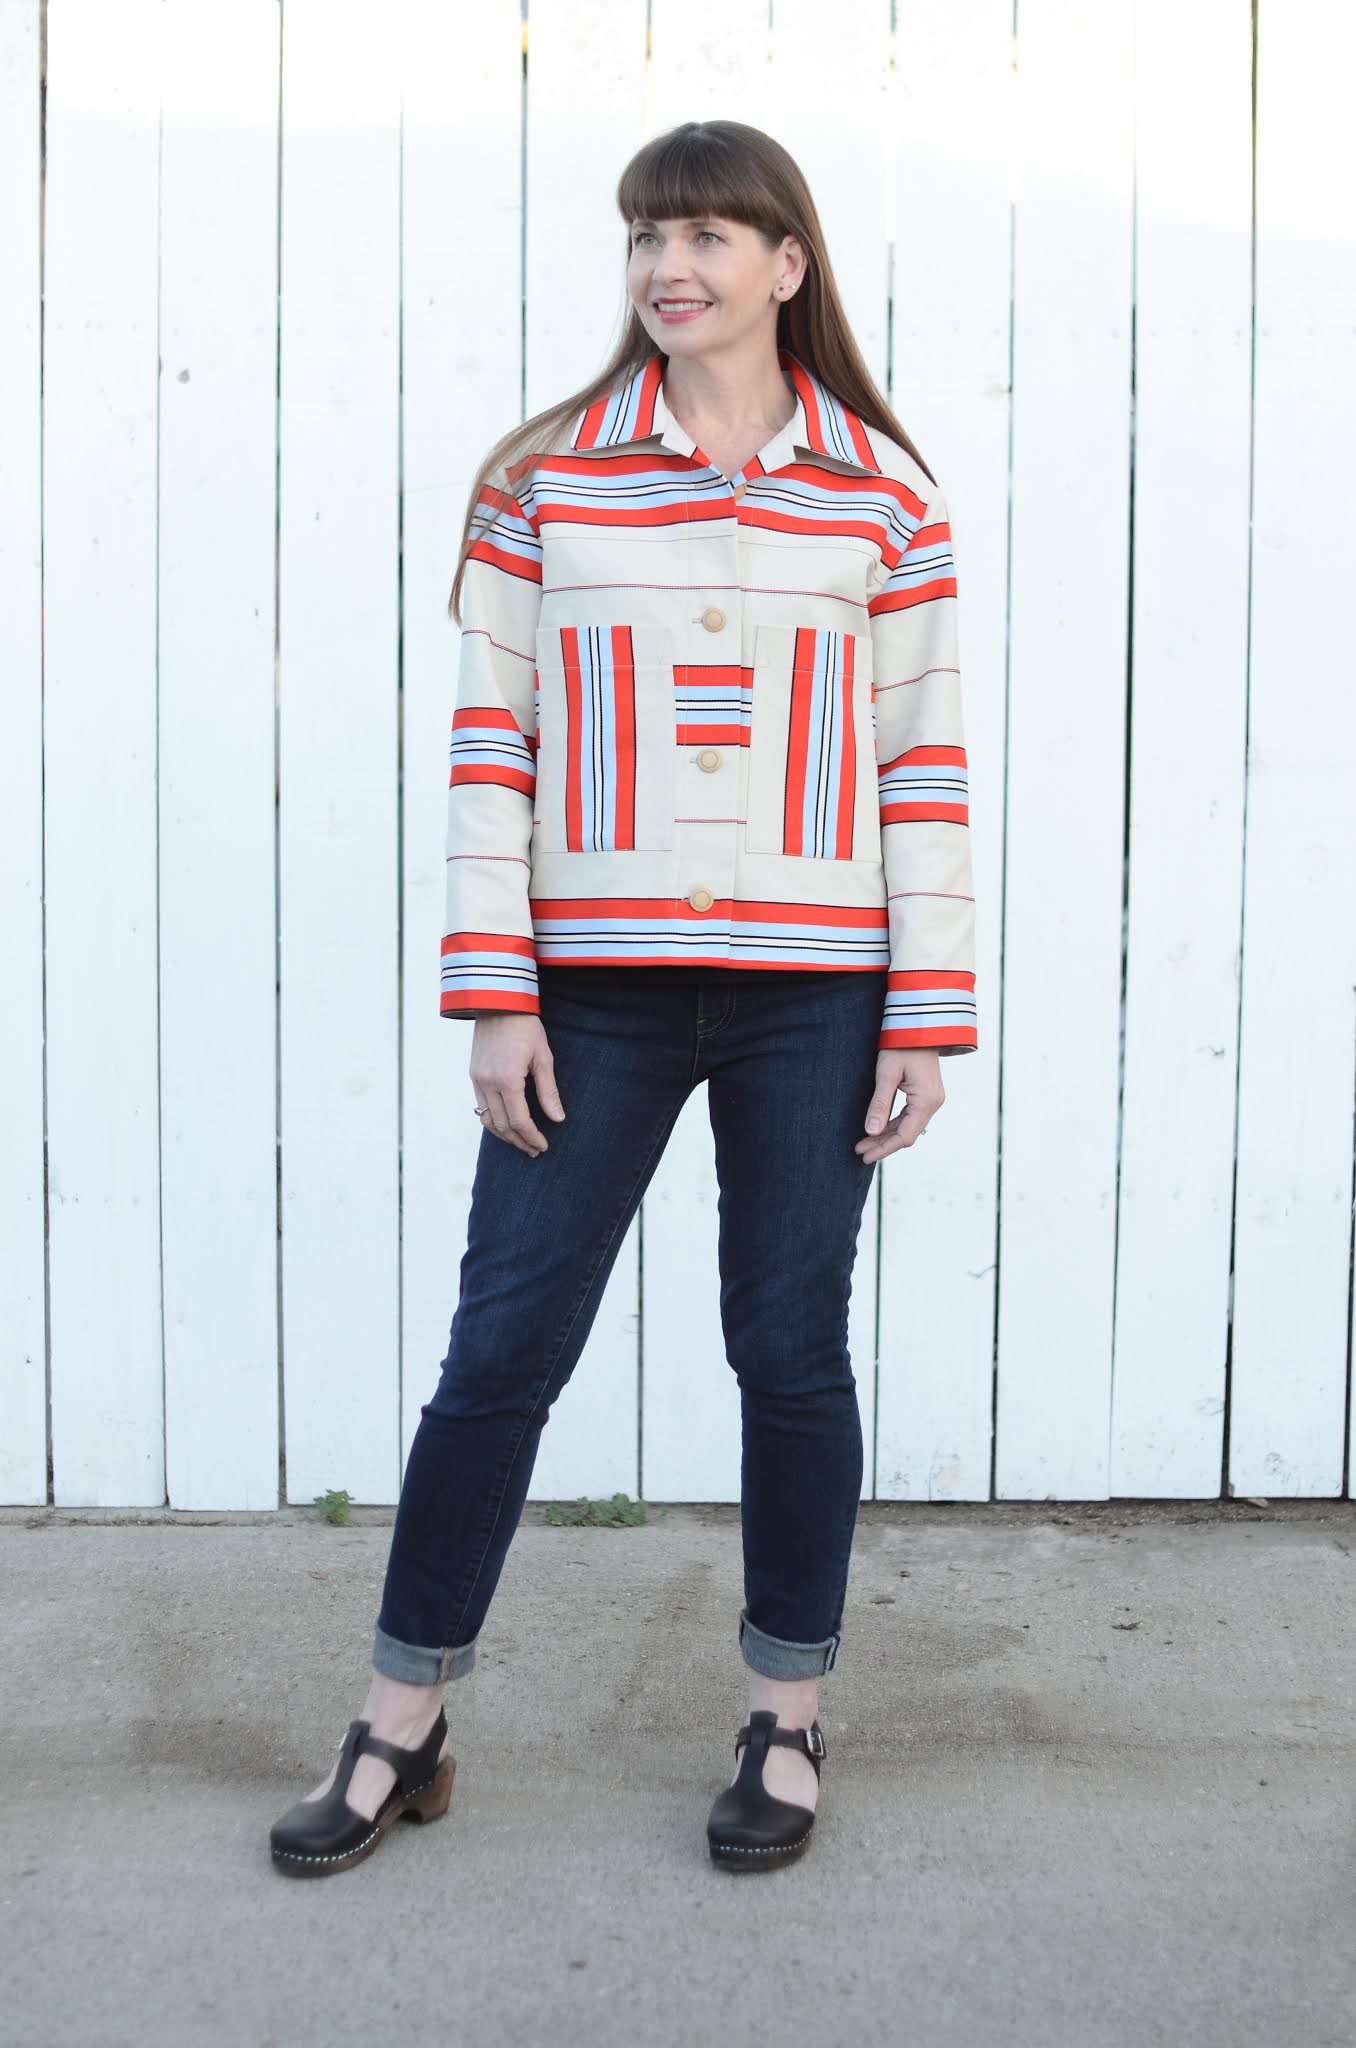 Made by a Fabricista: Papercut Patterns Stacker Jacket